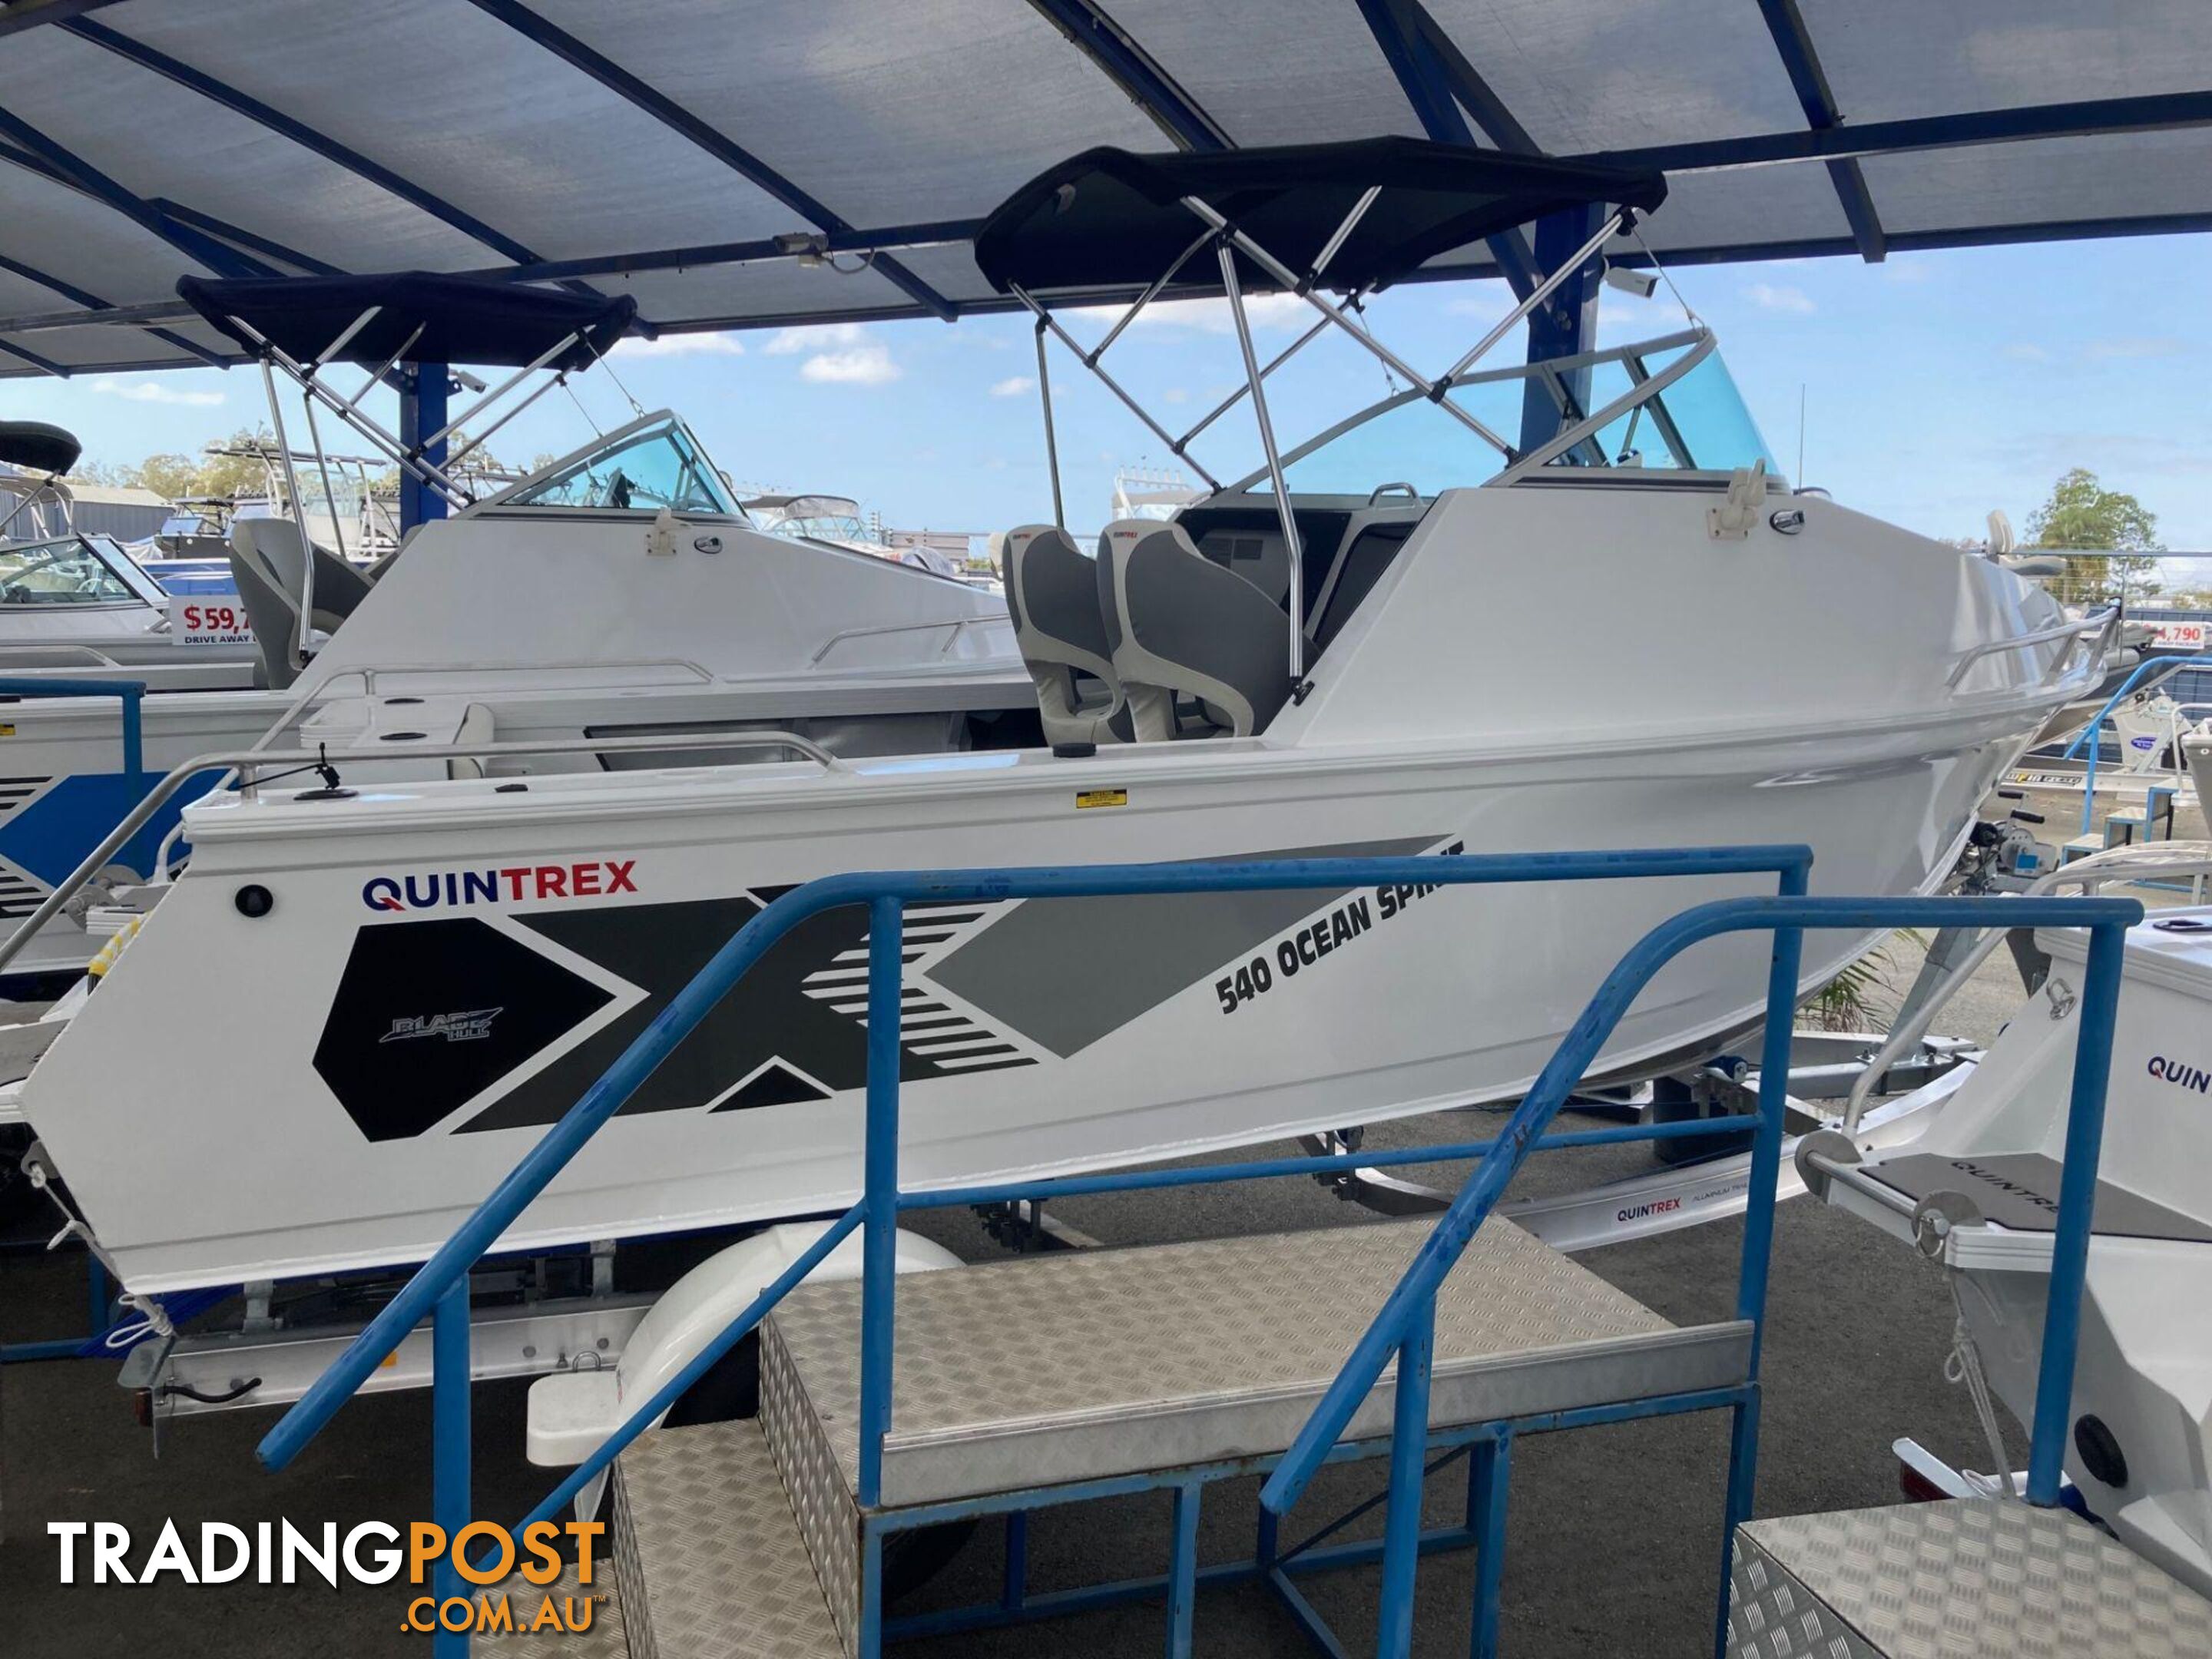 In Stock Now !  This Quintrex 540 OCEAN SPIRIT Our Stock Boat Package F130 Hp